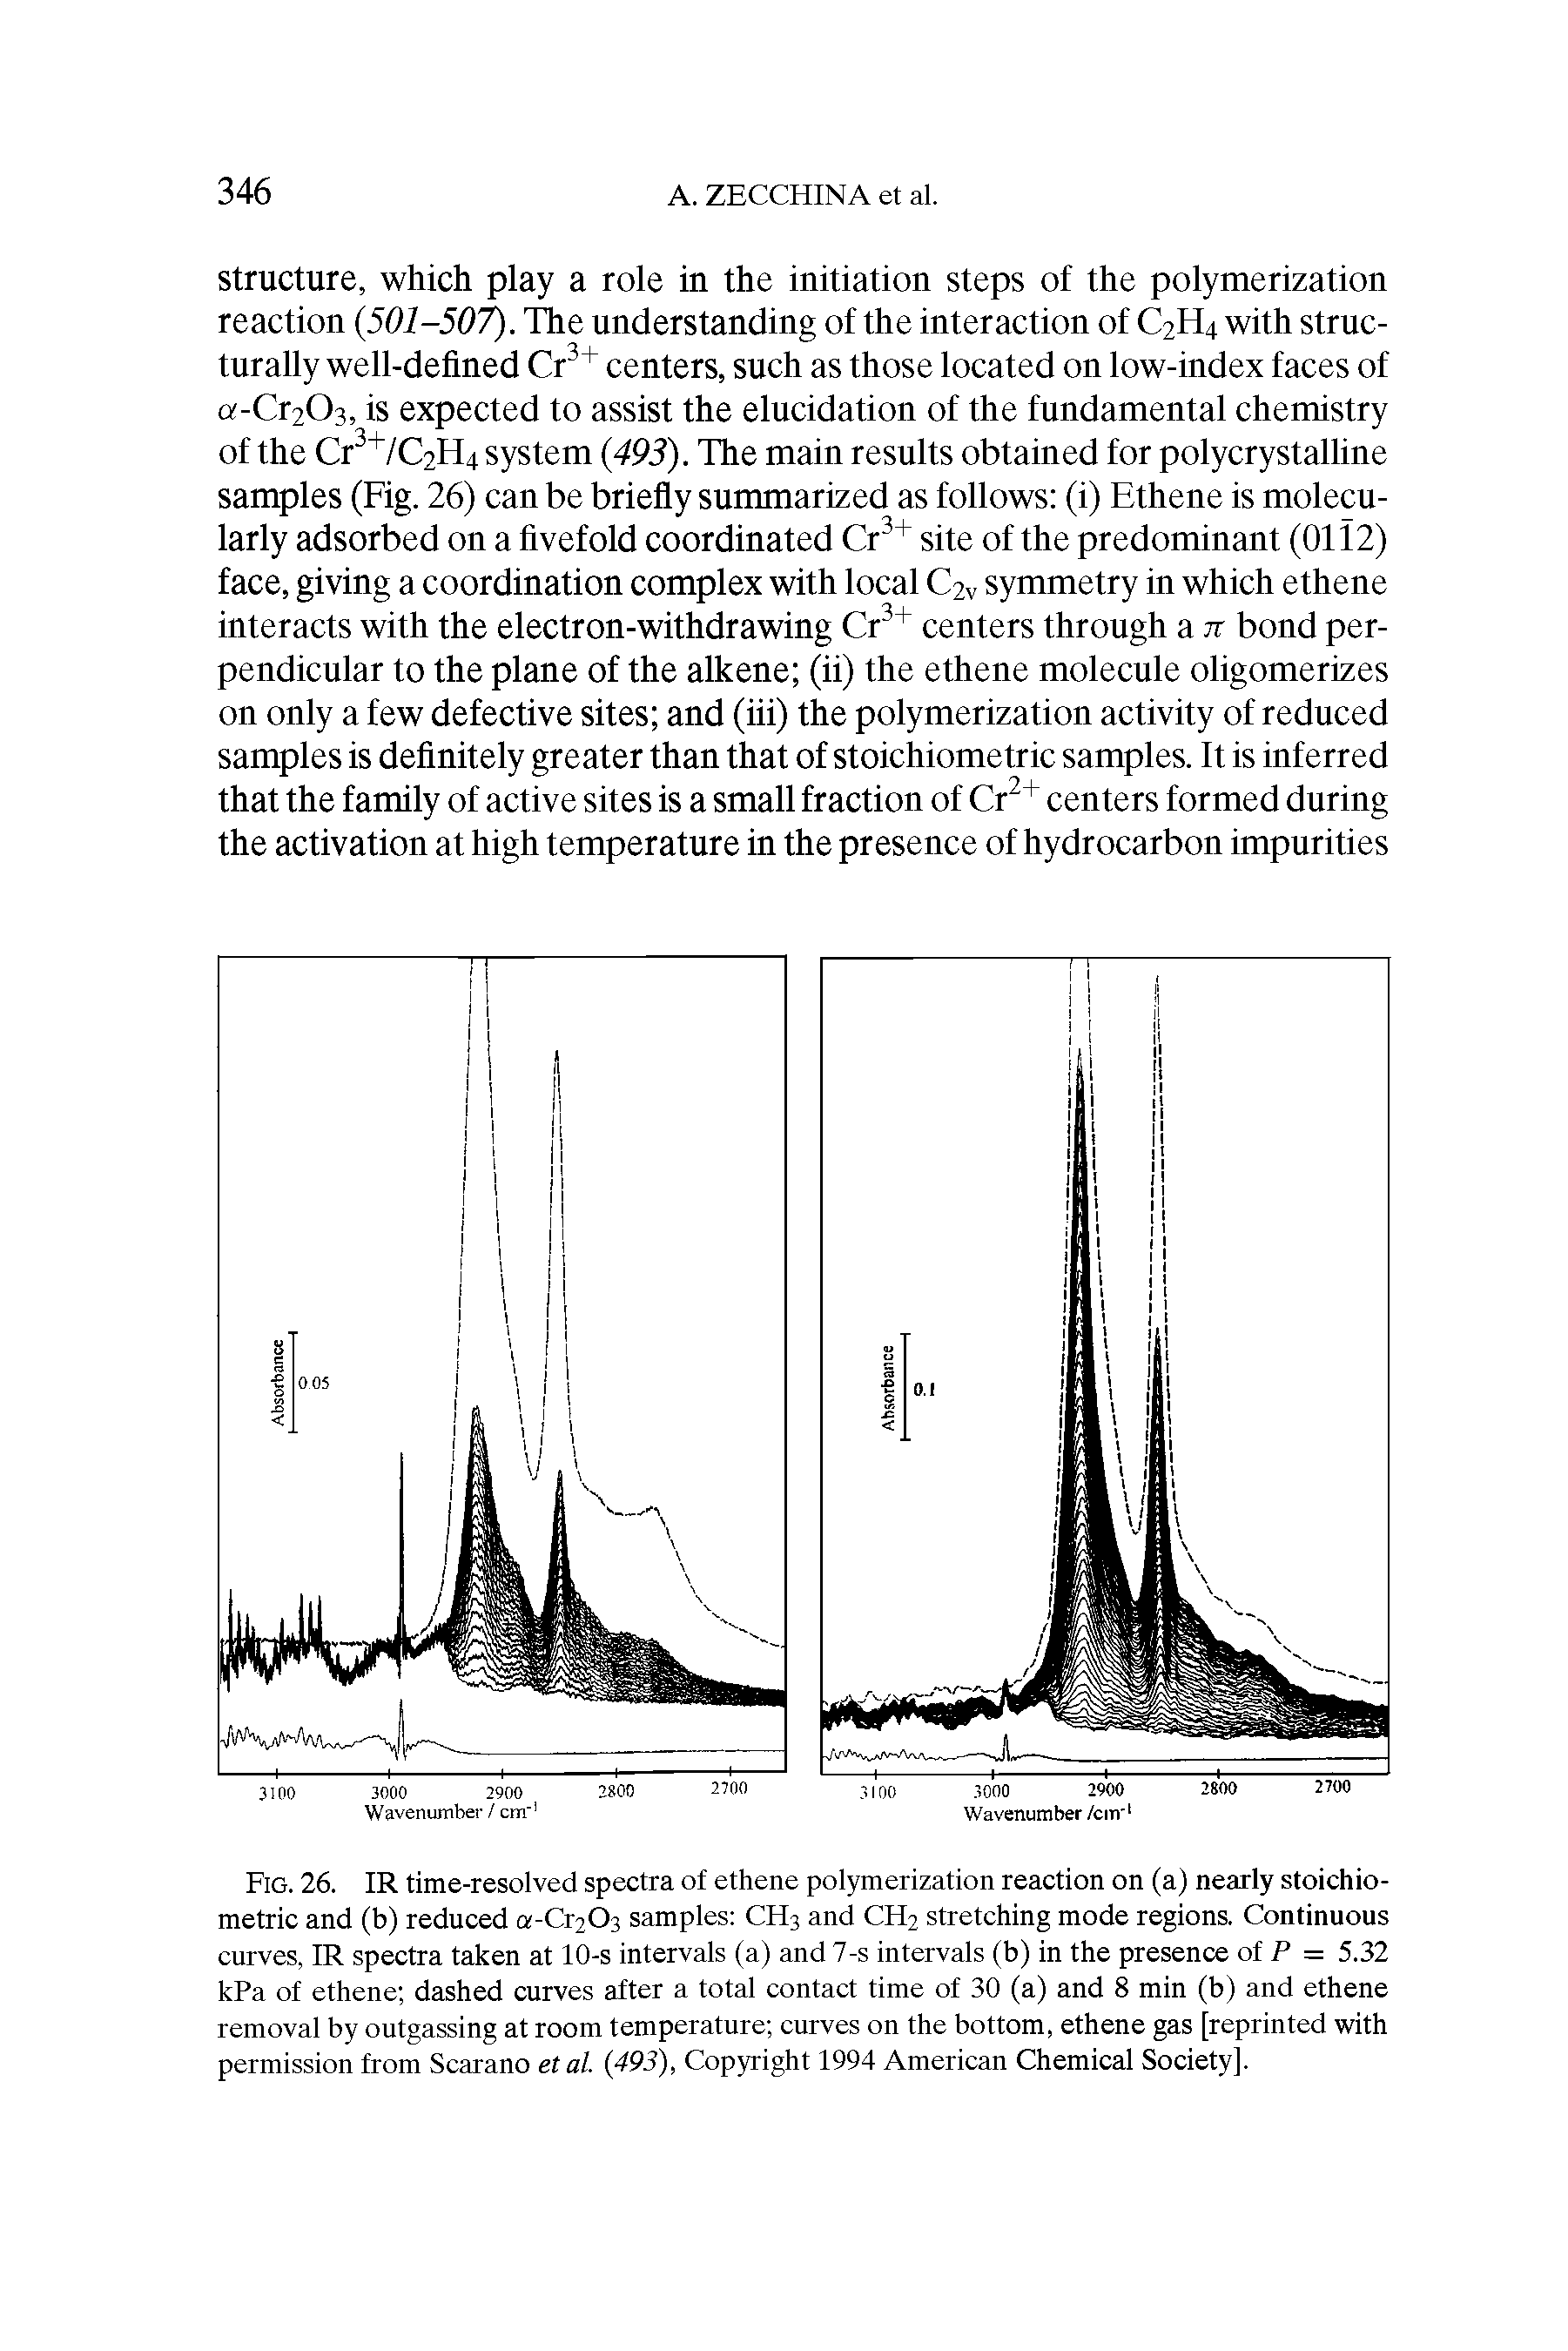 Fig. 26. IR time-resolved spectra of ethene polymerization reaction on (a) nearly stoichiometric and (b) reduced a-Cr2C>3 samples CH3 and CH2 stretching mode regions. Continuous curves, IR spectra taken at 10-s intervals (a) and 7-s intervals (b) in the presence of P = 5.32 kPa of ethene dashed curves after a total contact time of 30 (a) and 8 min (b) and ethene removal by outgassing at room temperature curves on the bottom, ethene gas [reprinted with permission from Scarano etal. (493), Copyright 1994 American Chemical Society].